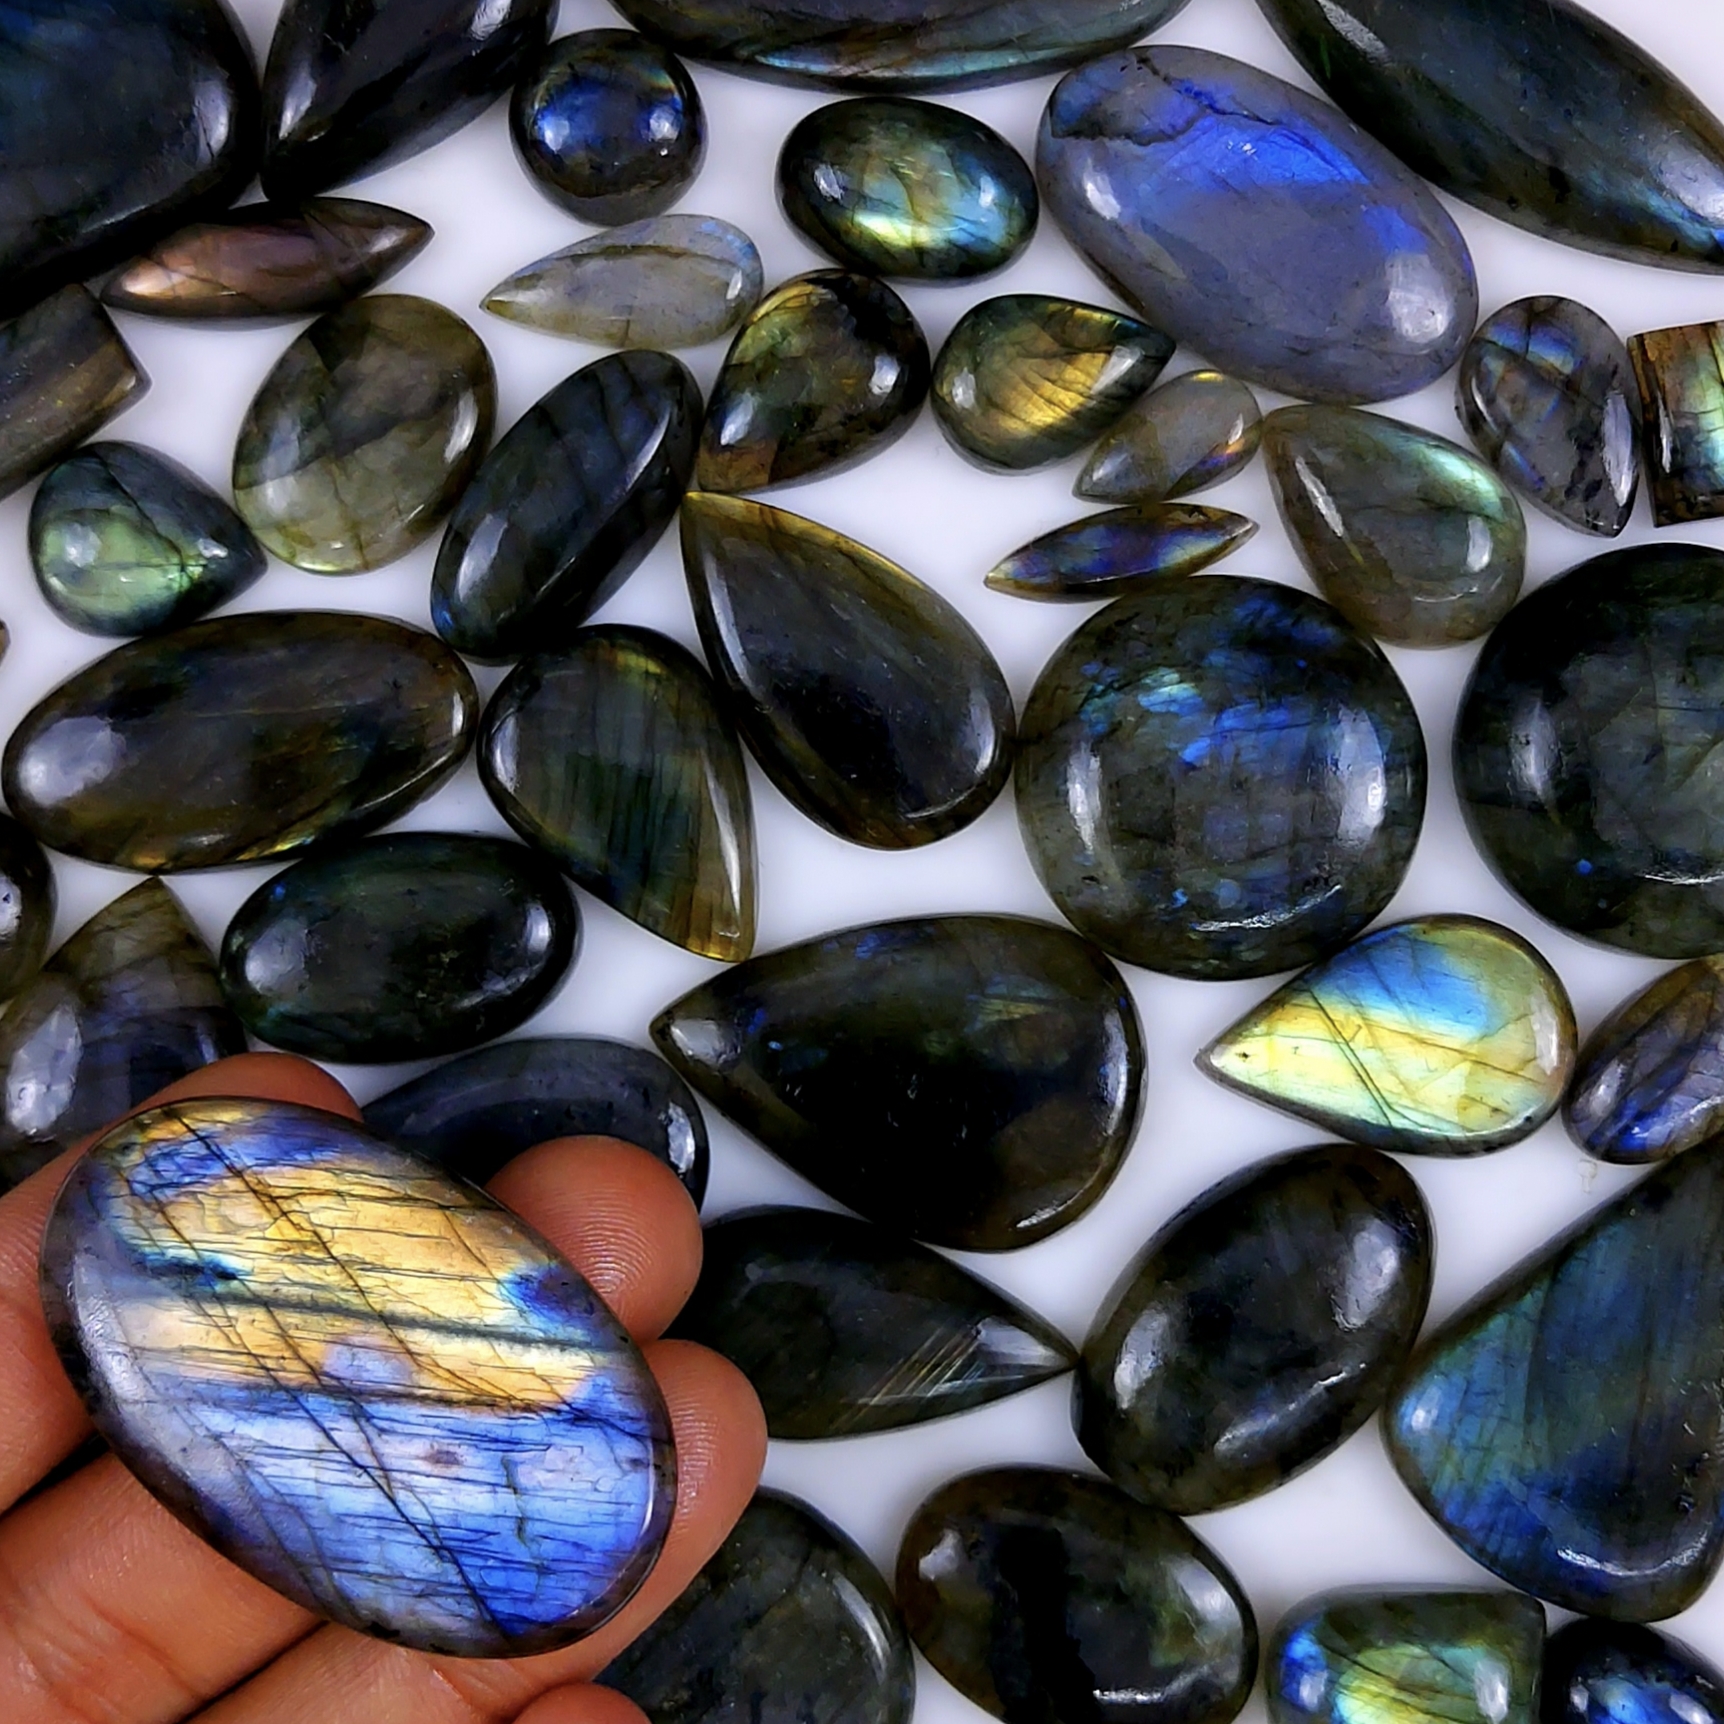 23pc 1495Cts Labradorite Cabochon Multifire Healing Crystal For Jewelry Supplies, Labradorite Necklace Handmade Wire Wrapped Gemstone Pendant 50x30 18x14mm#6334